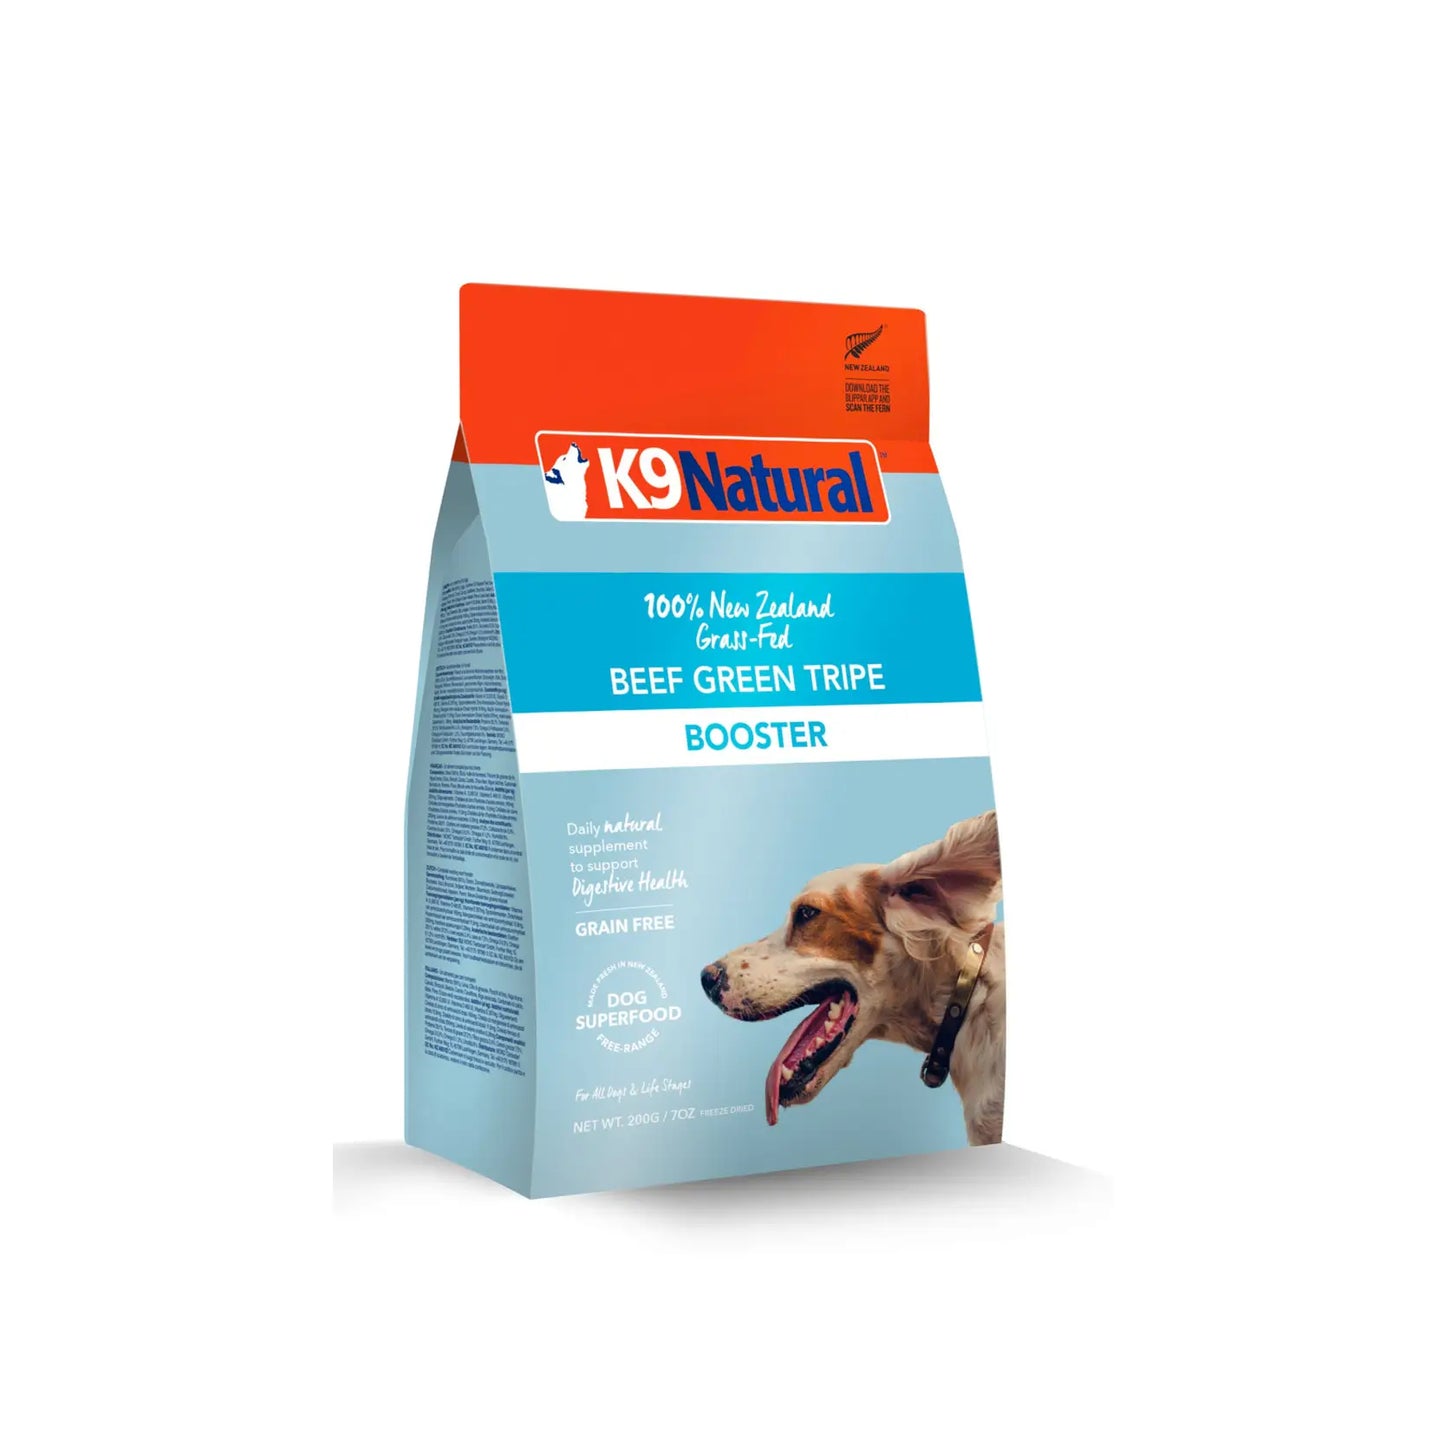 K9 Natural Freeze Dried Dog Booster - Beef Green Tripe